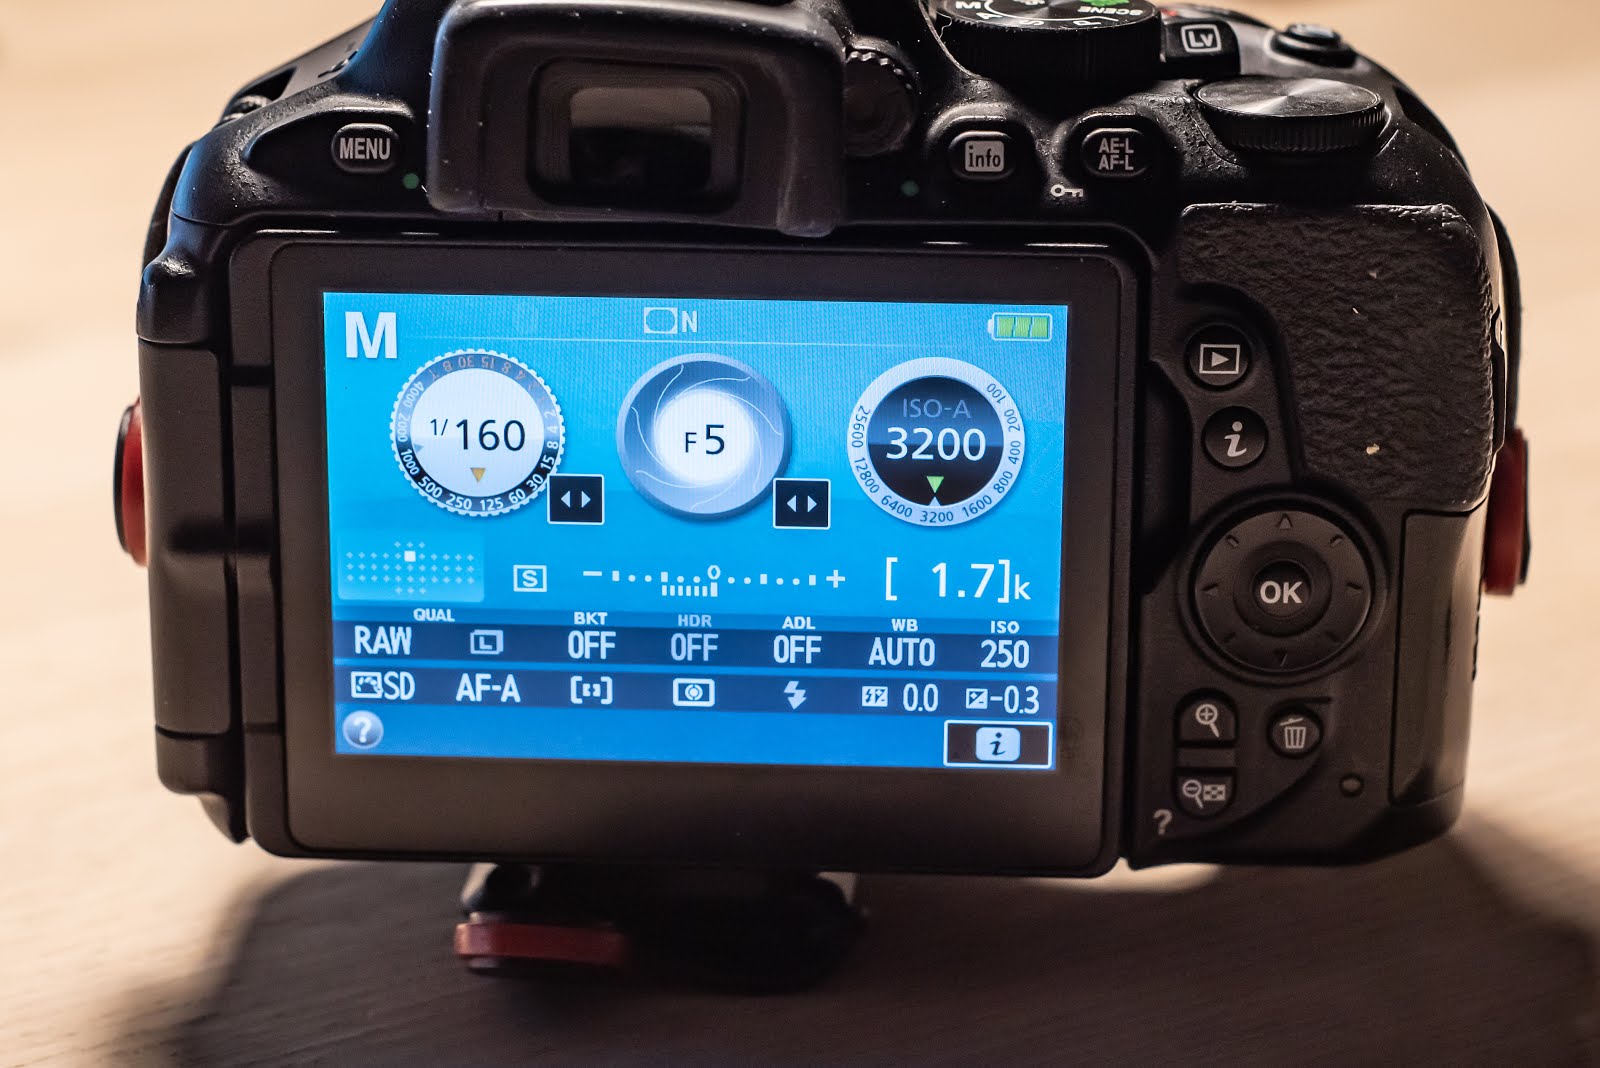 Nikon D5600: How to use manual exposure? – frederikboving